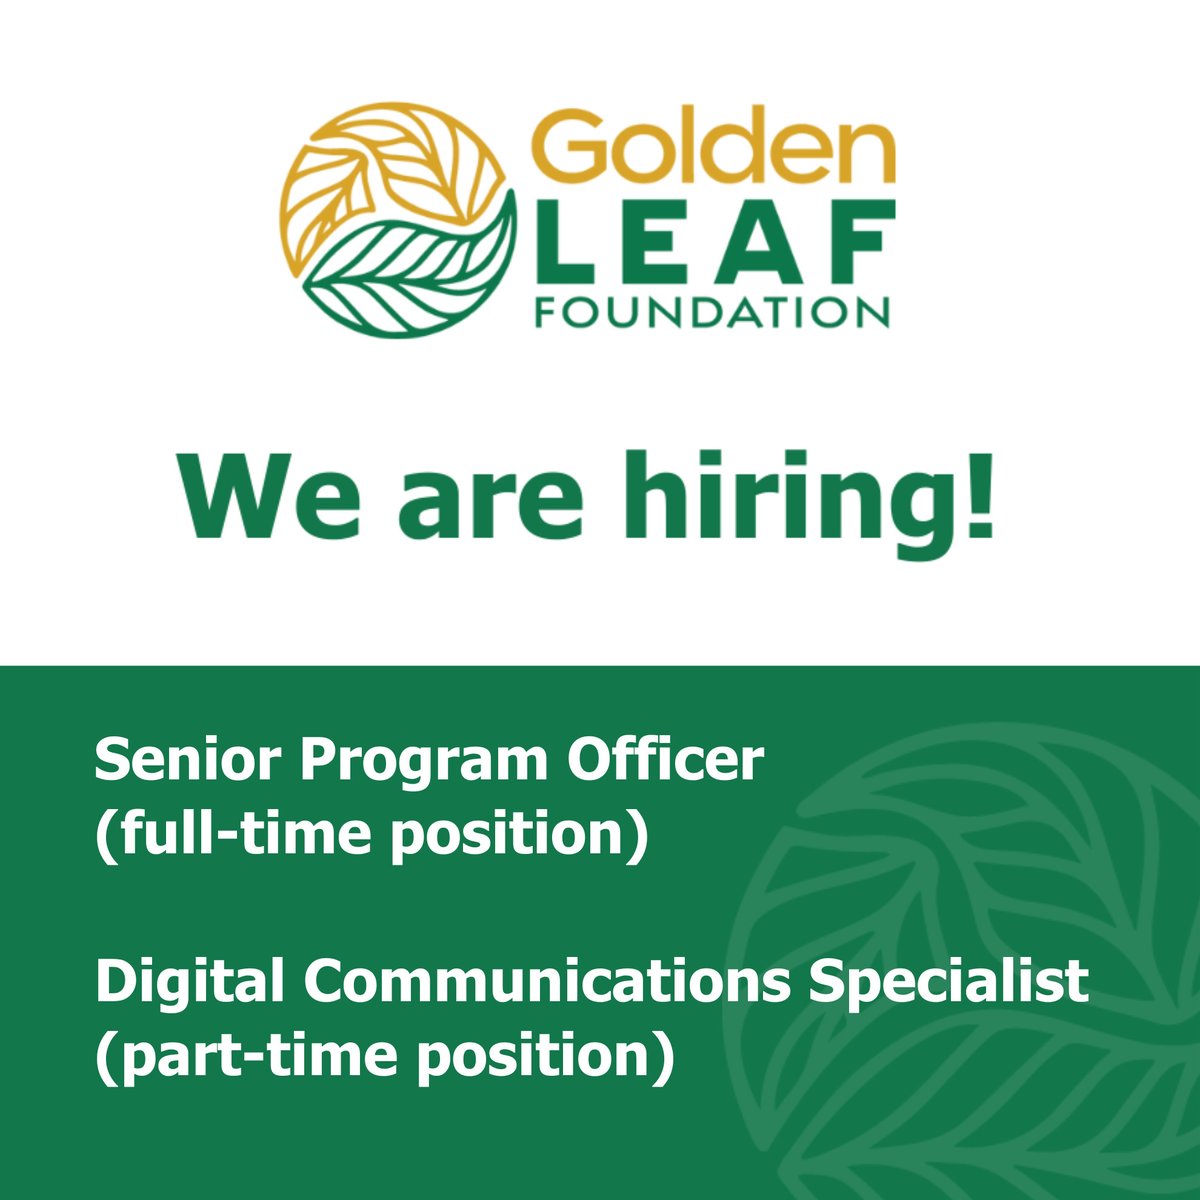 RT: Exciting opportunities at Golden LEAF! We're on the lookout for talented individuals to join our team -- Senior Program Officer & Digital Communications Specialist. Find out more about the roles & how to apply on our website. #careeropportunity #hiring goldenleaf.org/about/job-oppo…